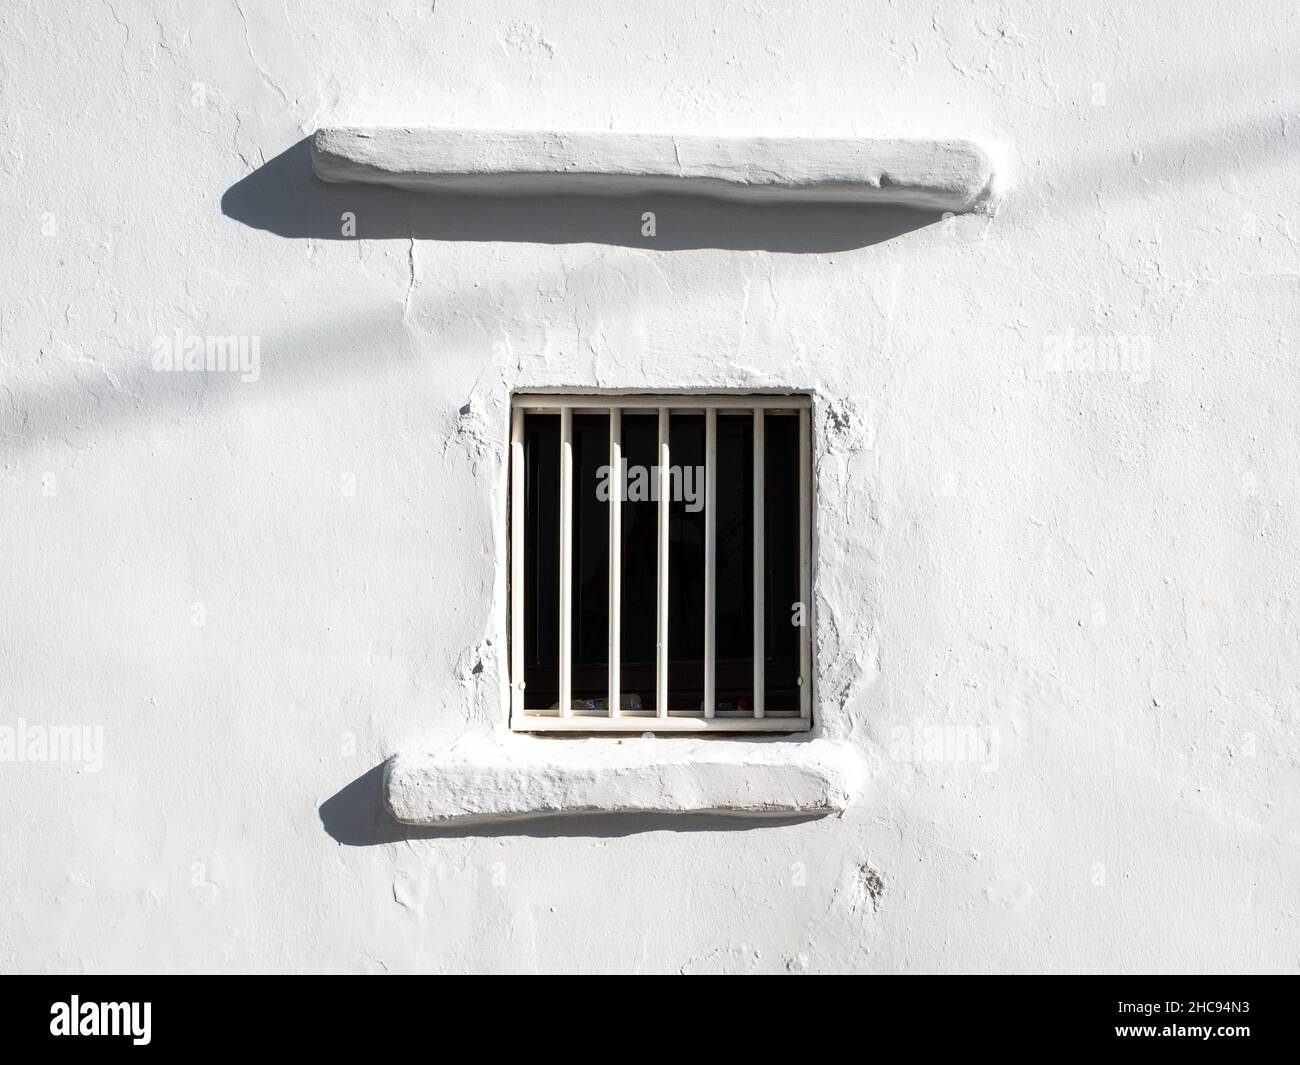 Typical window with bars closed on a white wall house. Taken on a very sunny summer day in the Aegean Island of Santorini, Greece Stock Photo